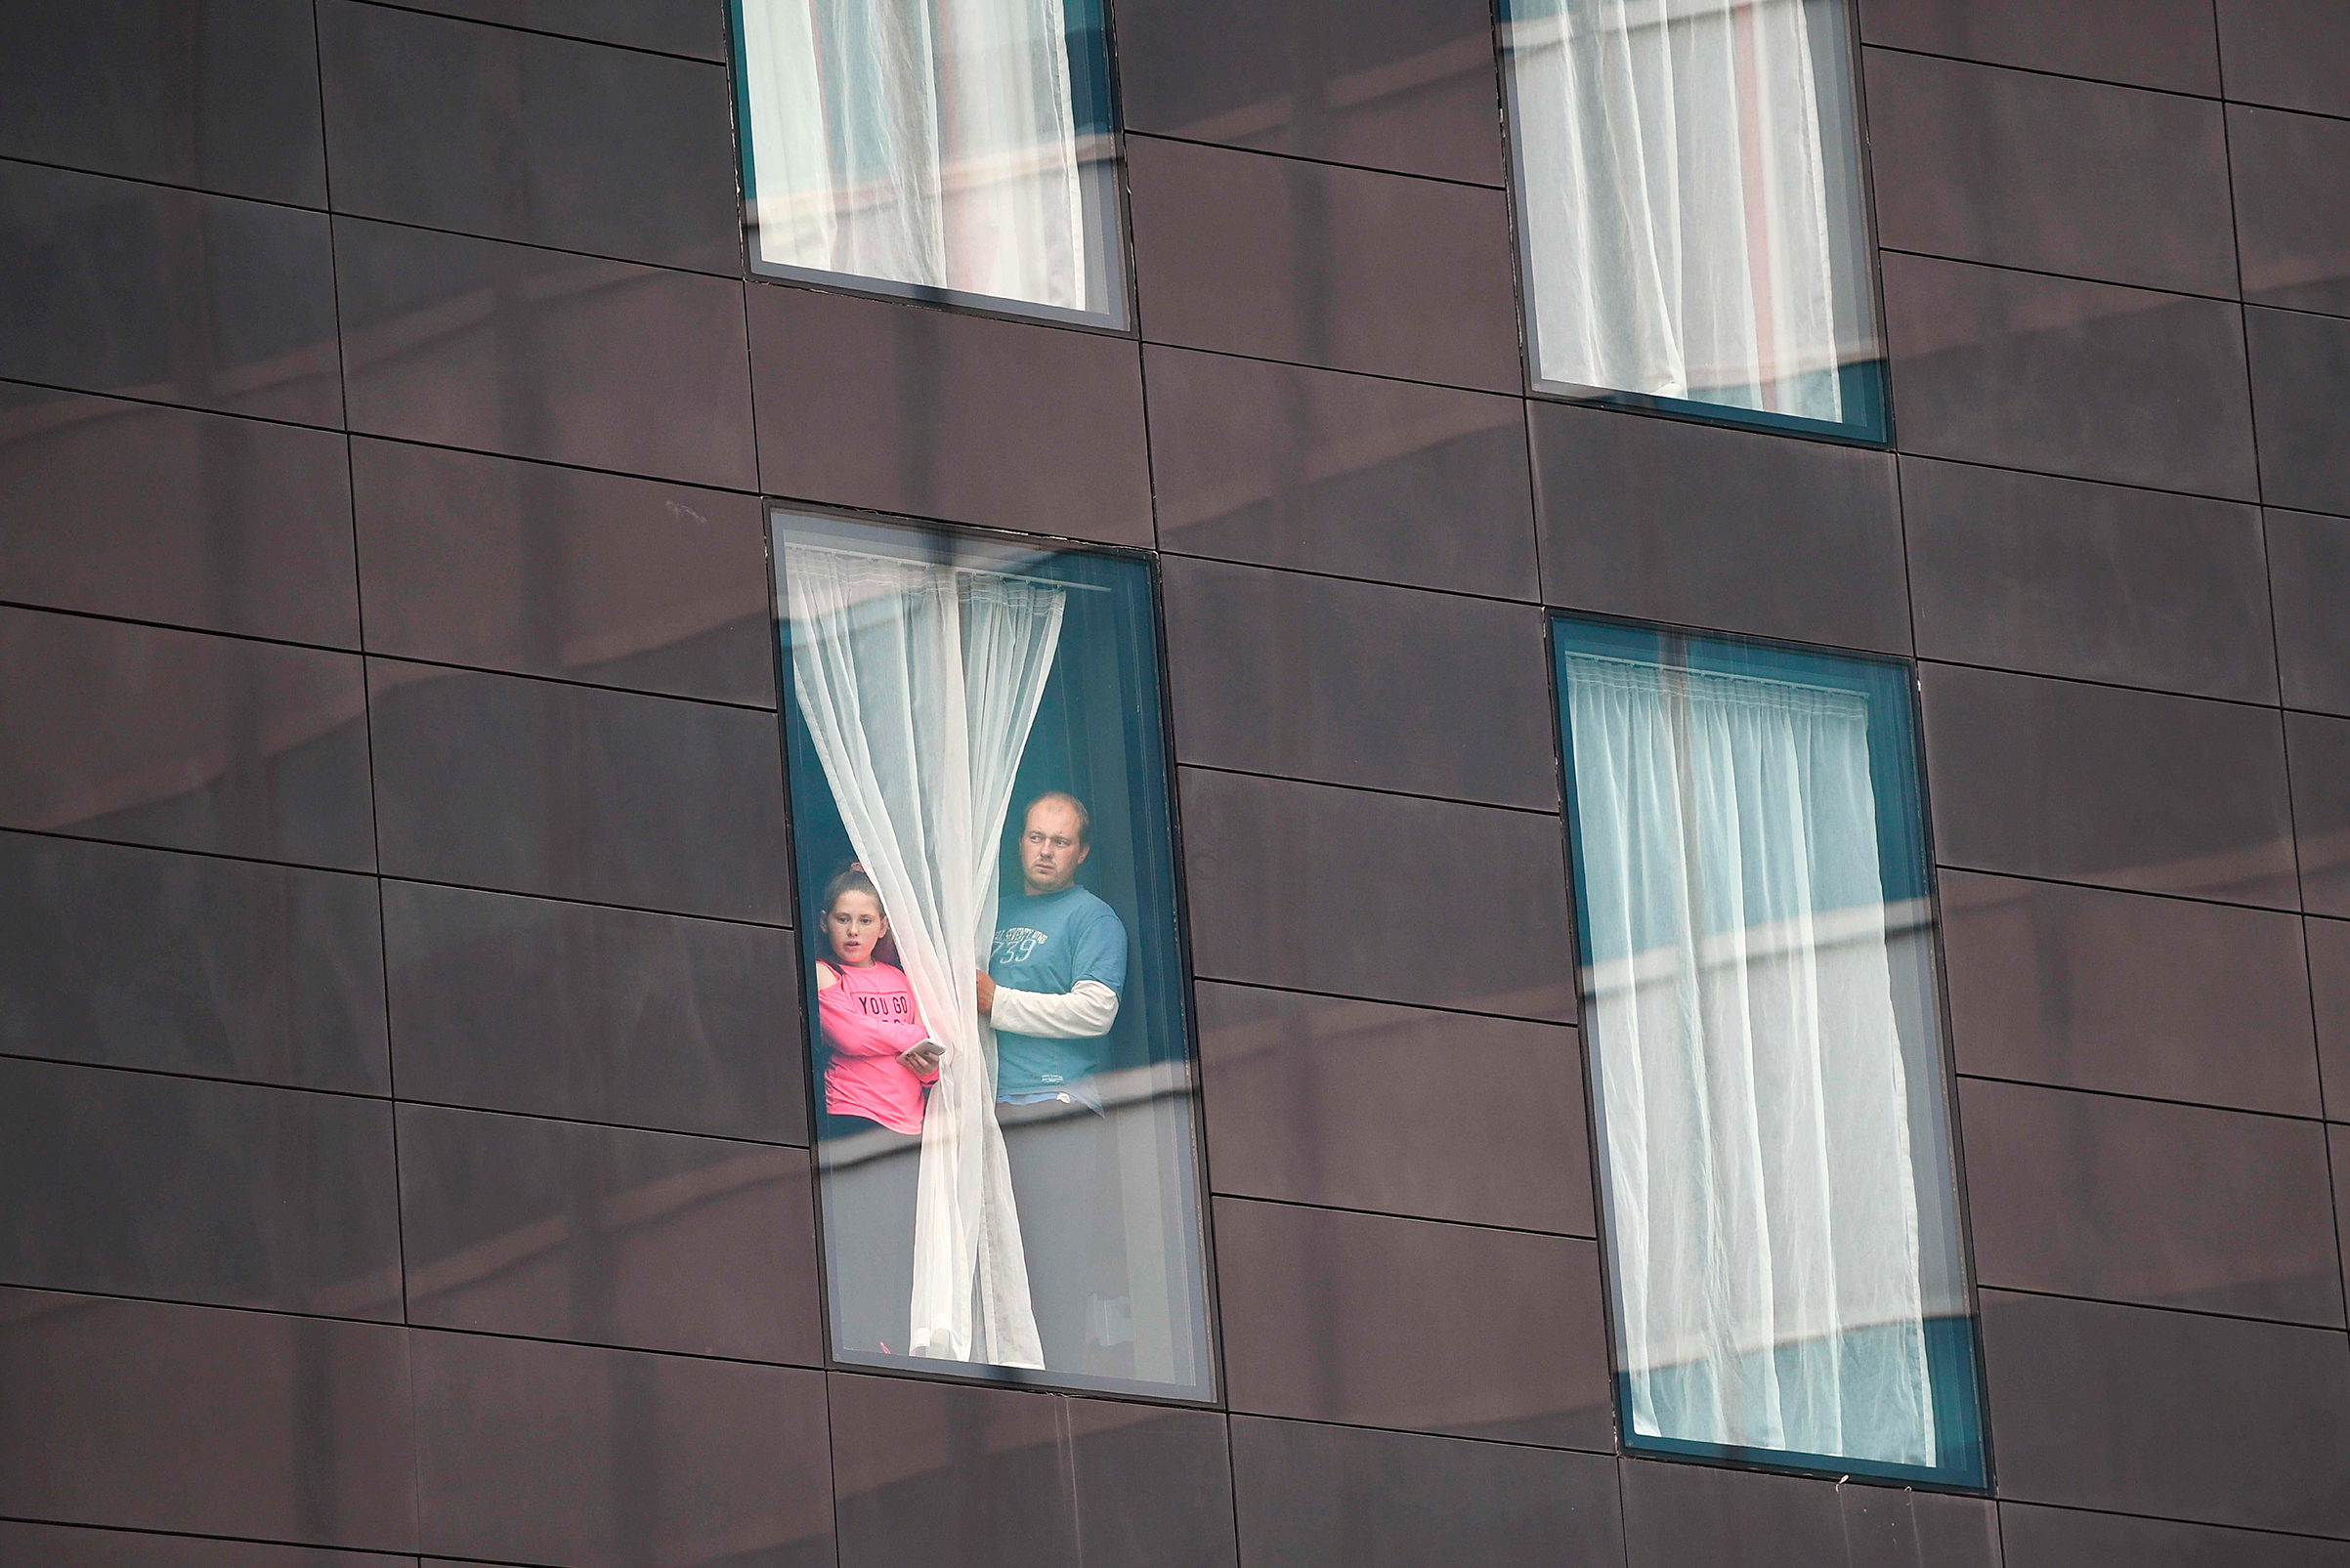 People affected by the May 22 terrorist attack in Manchester looked out from a hotel window (Oli Scarff—AFP/Getty Images)